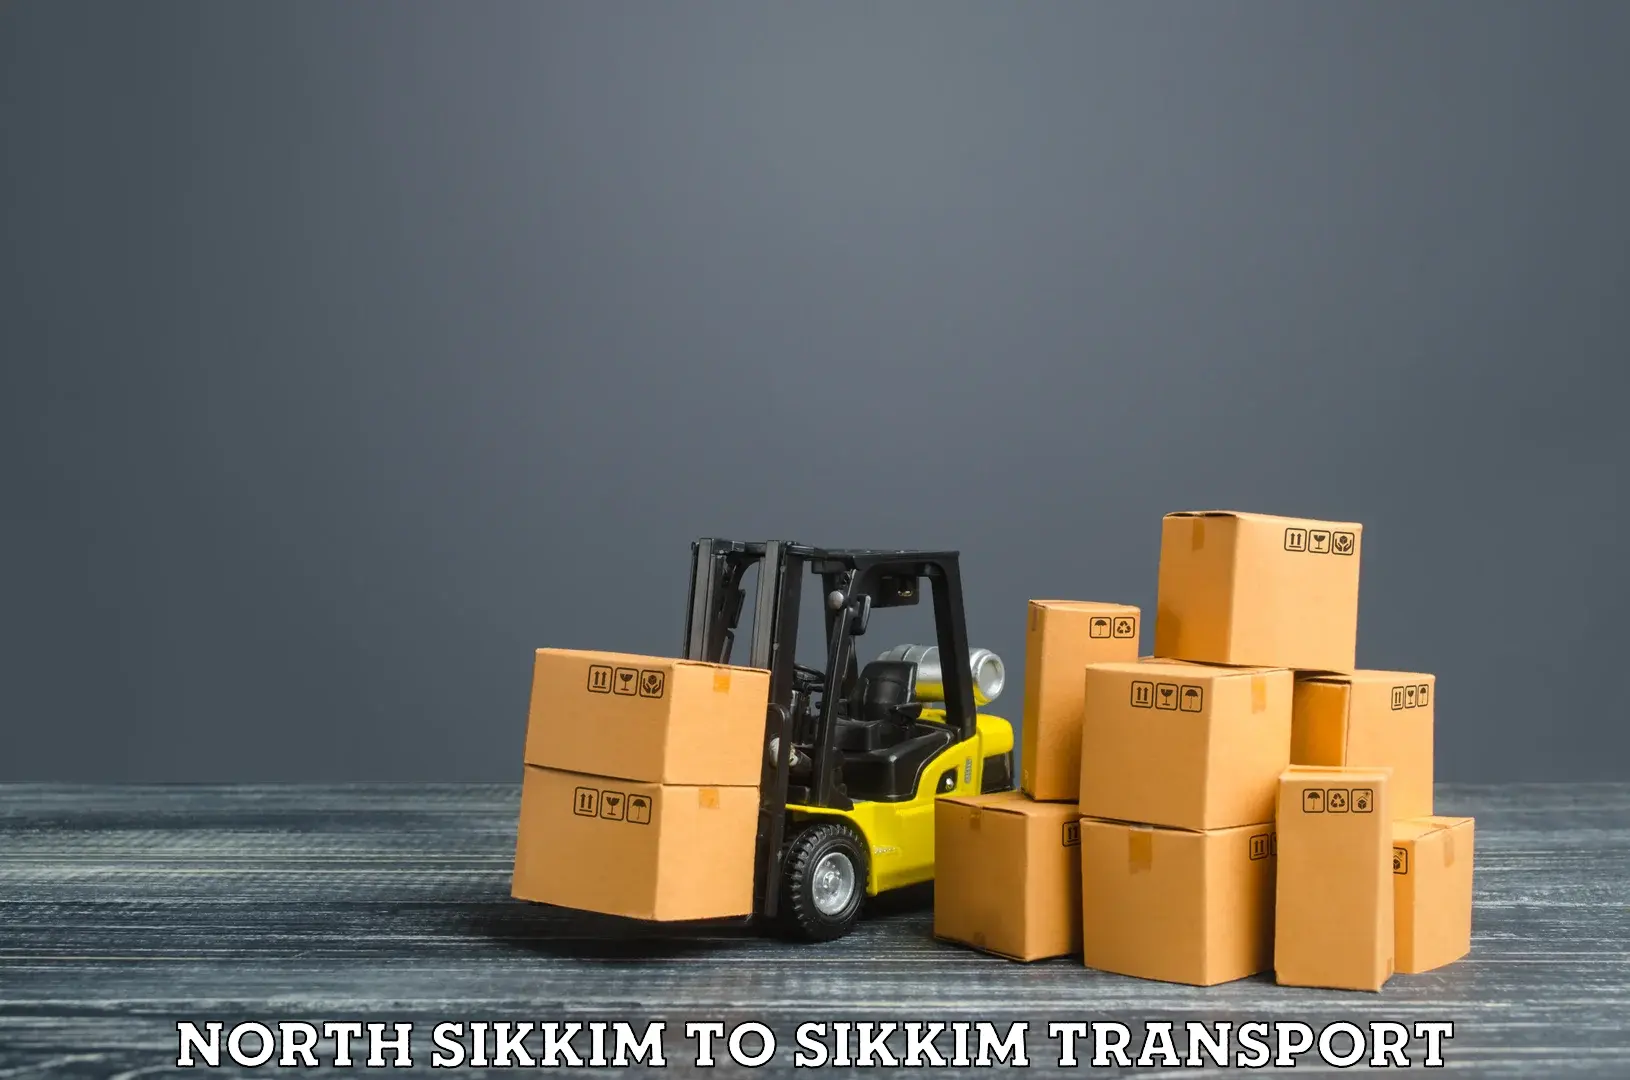 Nearby transport service North Sikkim to East Sikkim